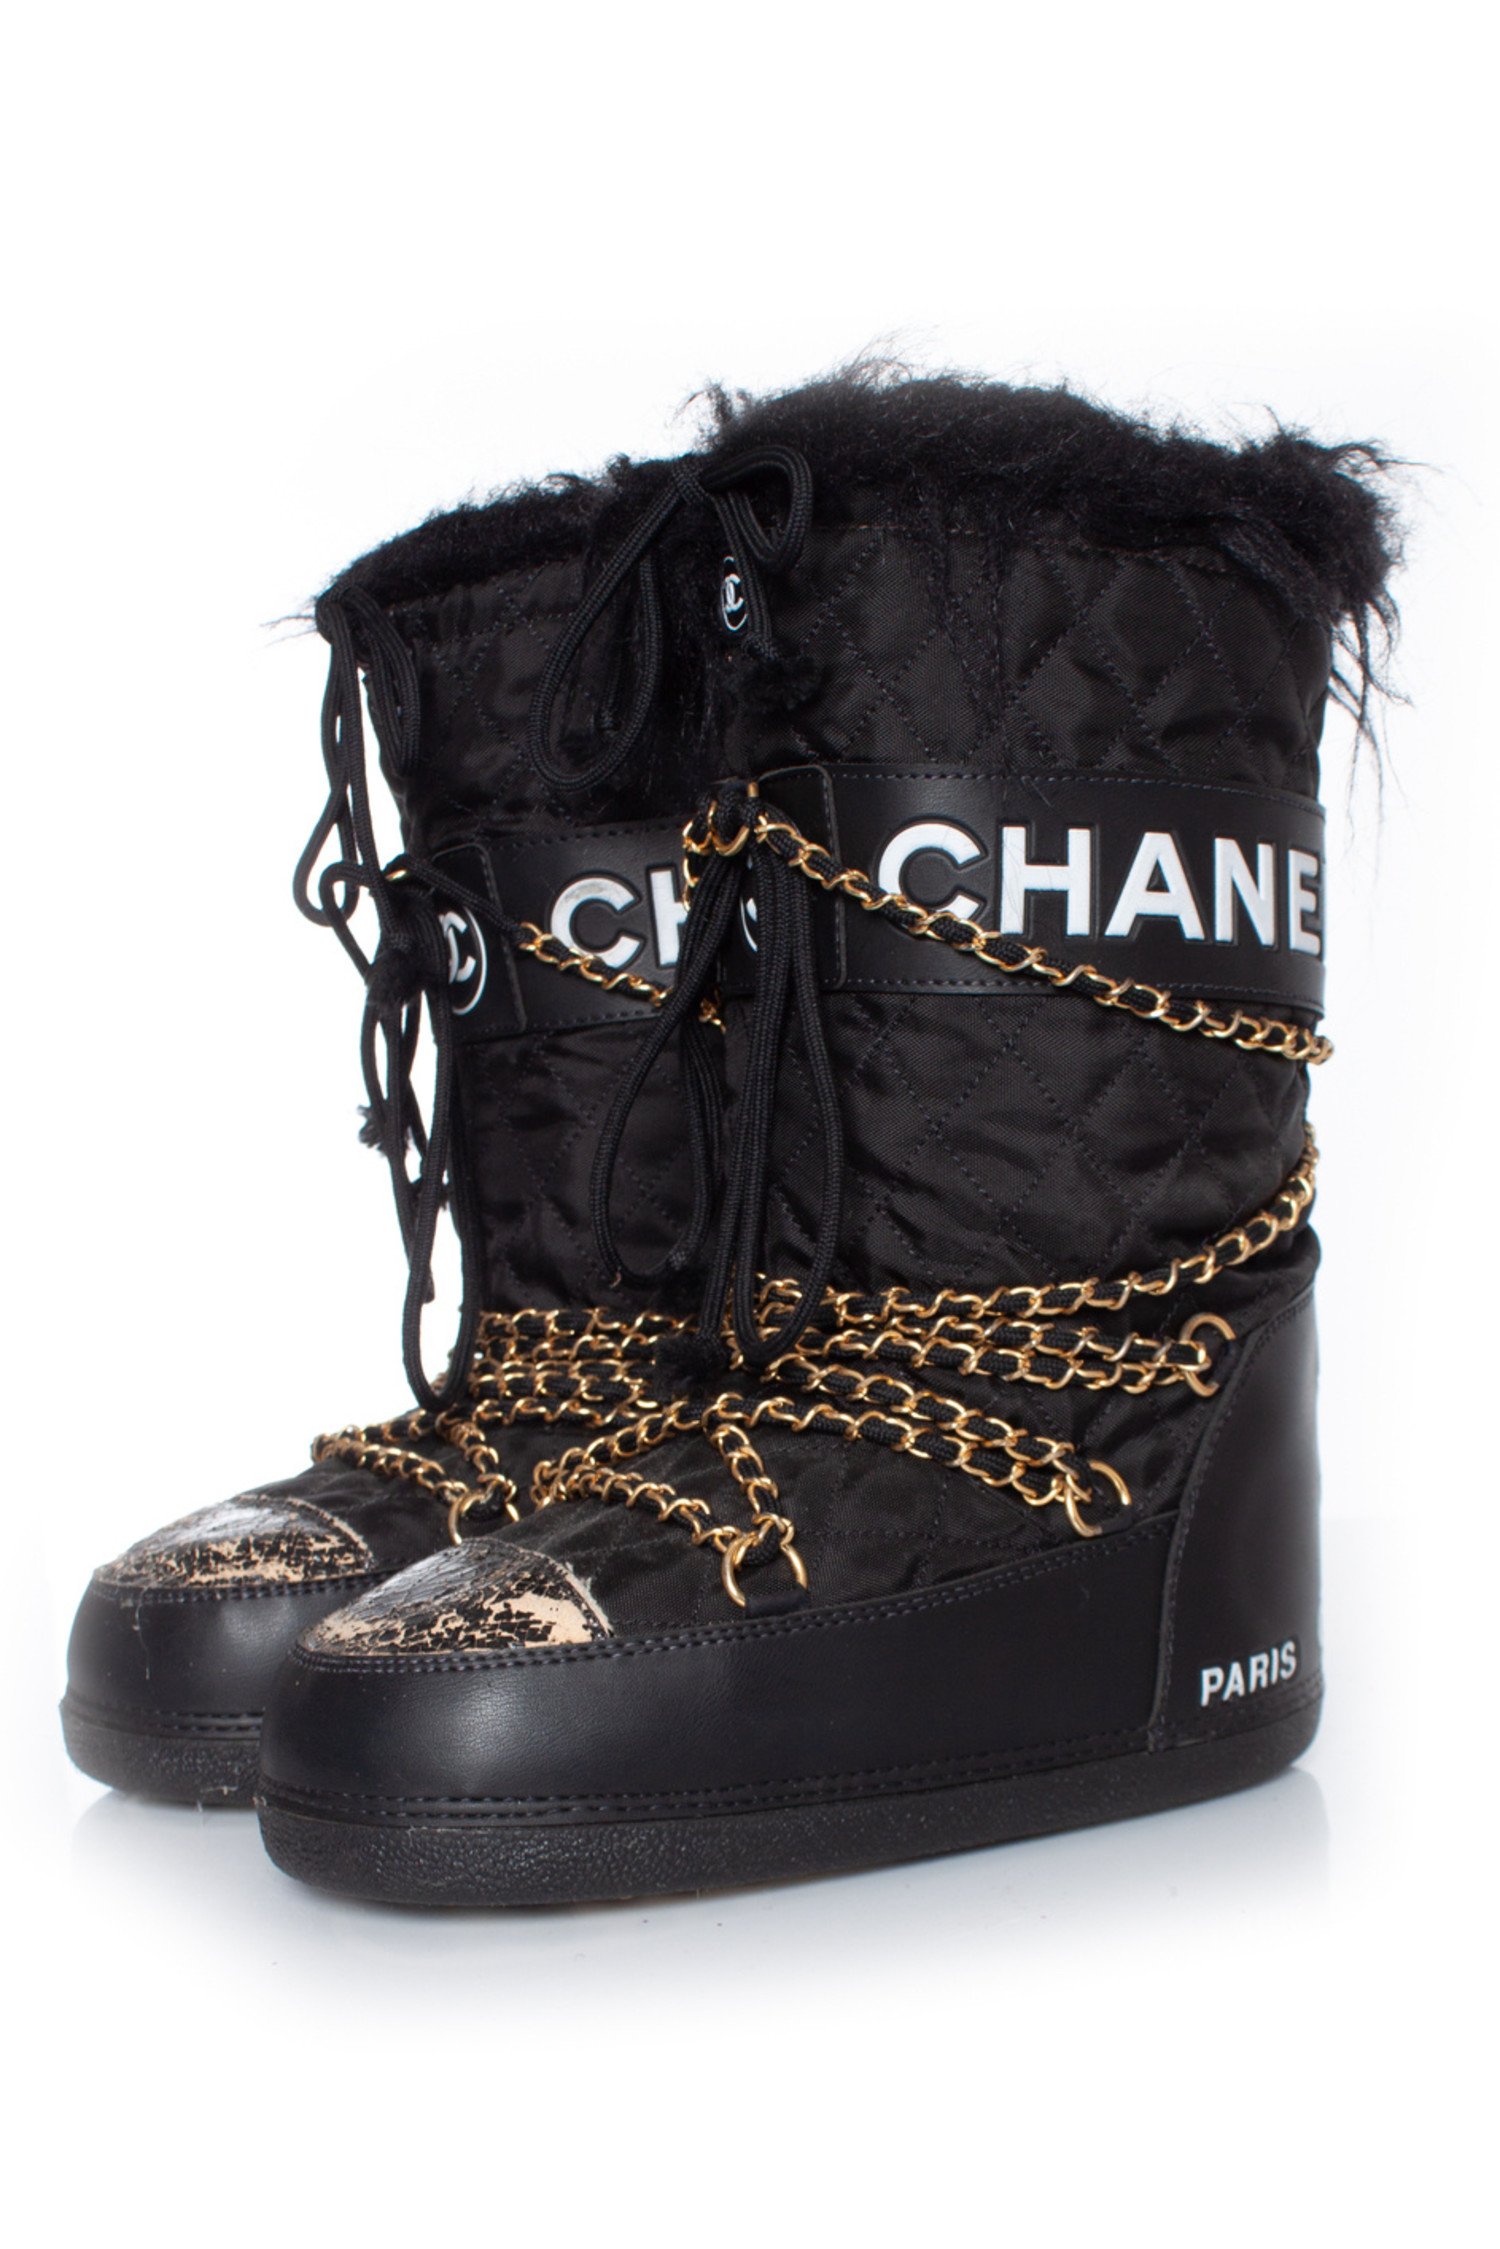 Chanel Chunky Sole Snow Boots in Black Leather ref887468  Joli Closet